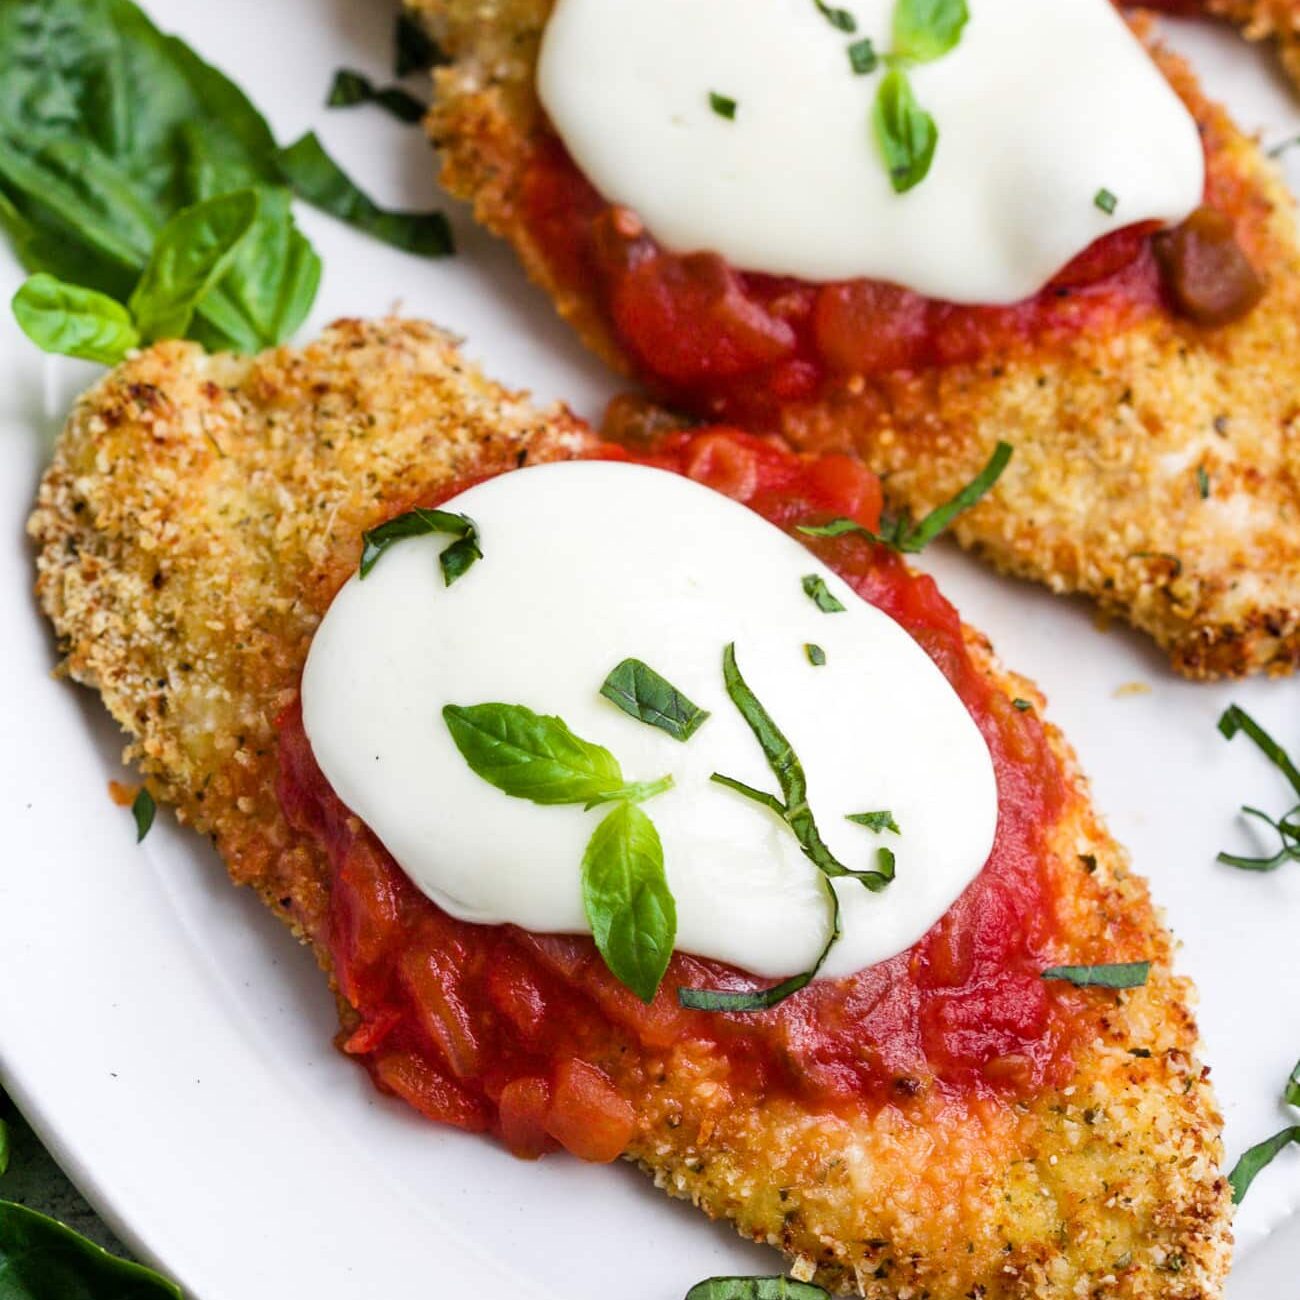 Baked chicken parmesan on a white serving plate.